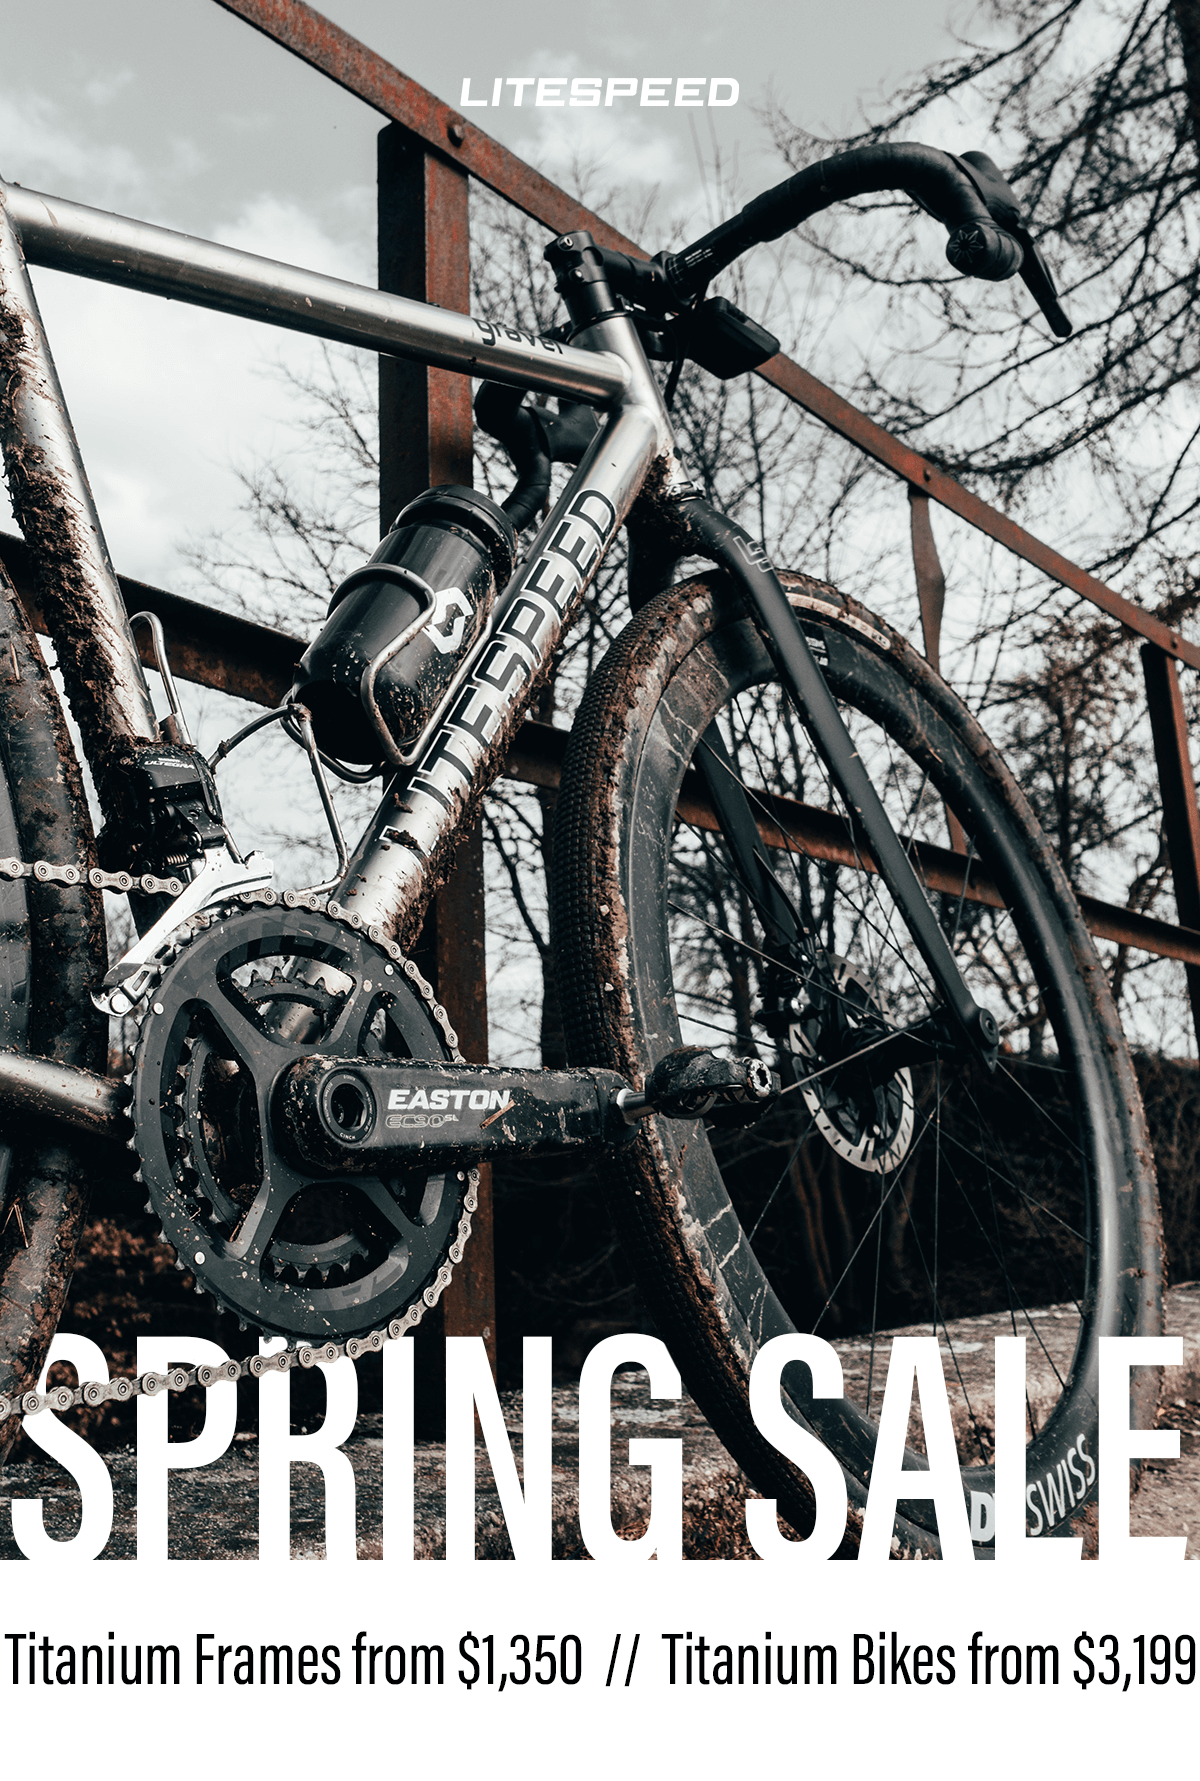 Savings ending! Titanium frames on sale from $1,350 and bikes from $3,199. Shop now!